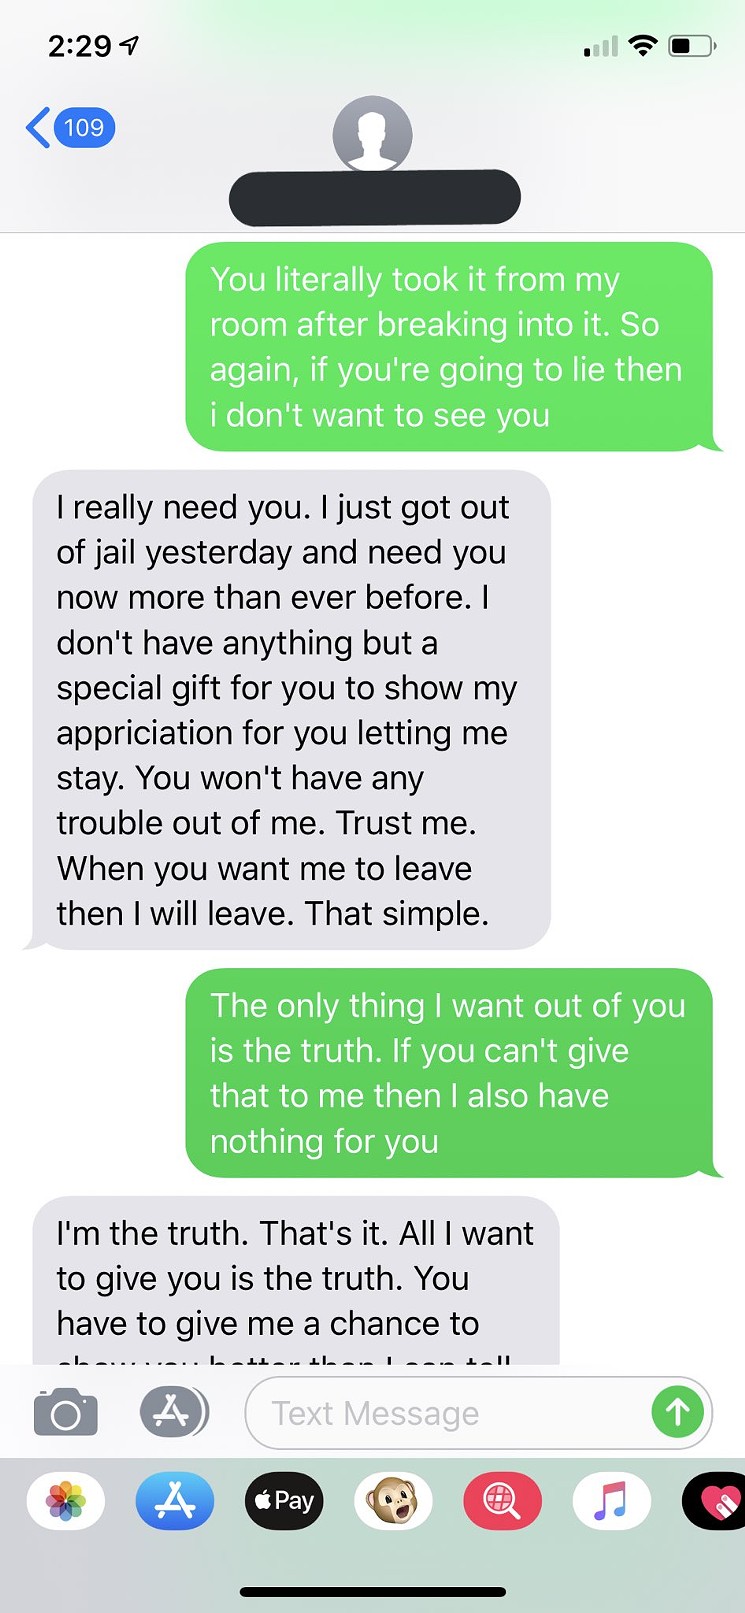 Texts between Khawaja and Jackson. Airbnb guests and hosts can gain access to each others' phone numbers through the app. - ALAVIA KHAWAJA